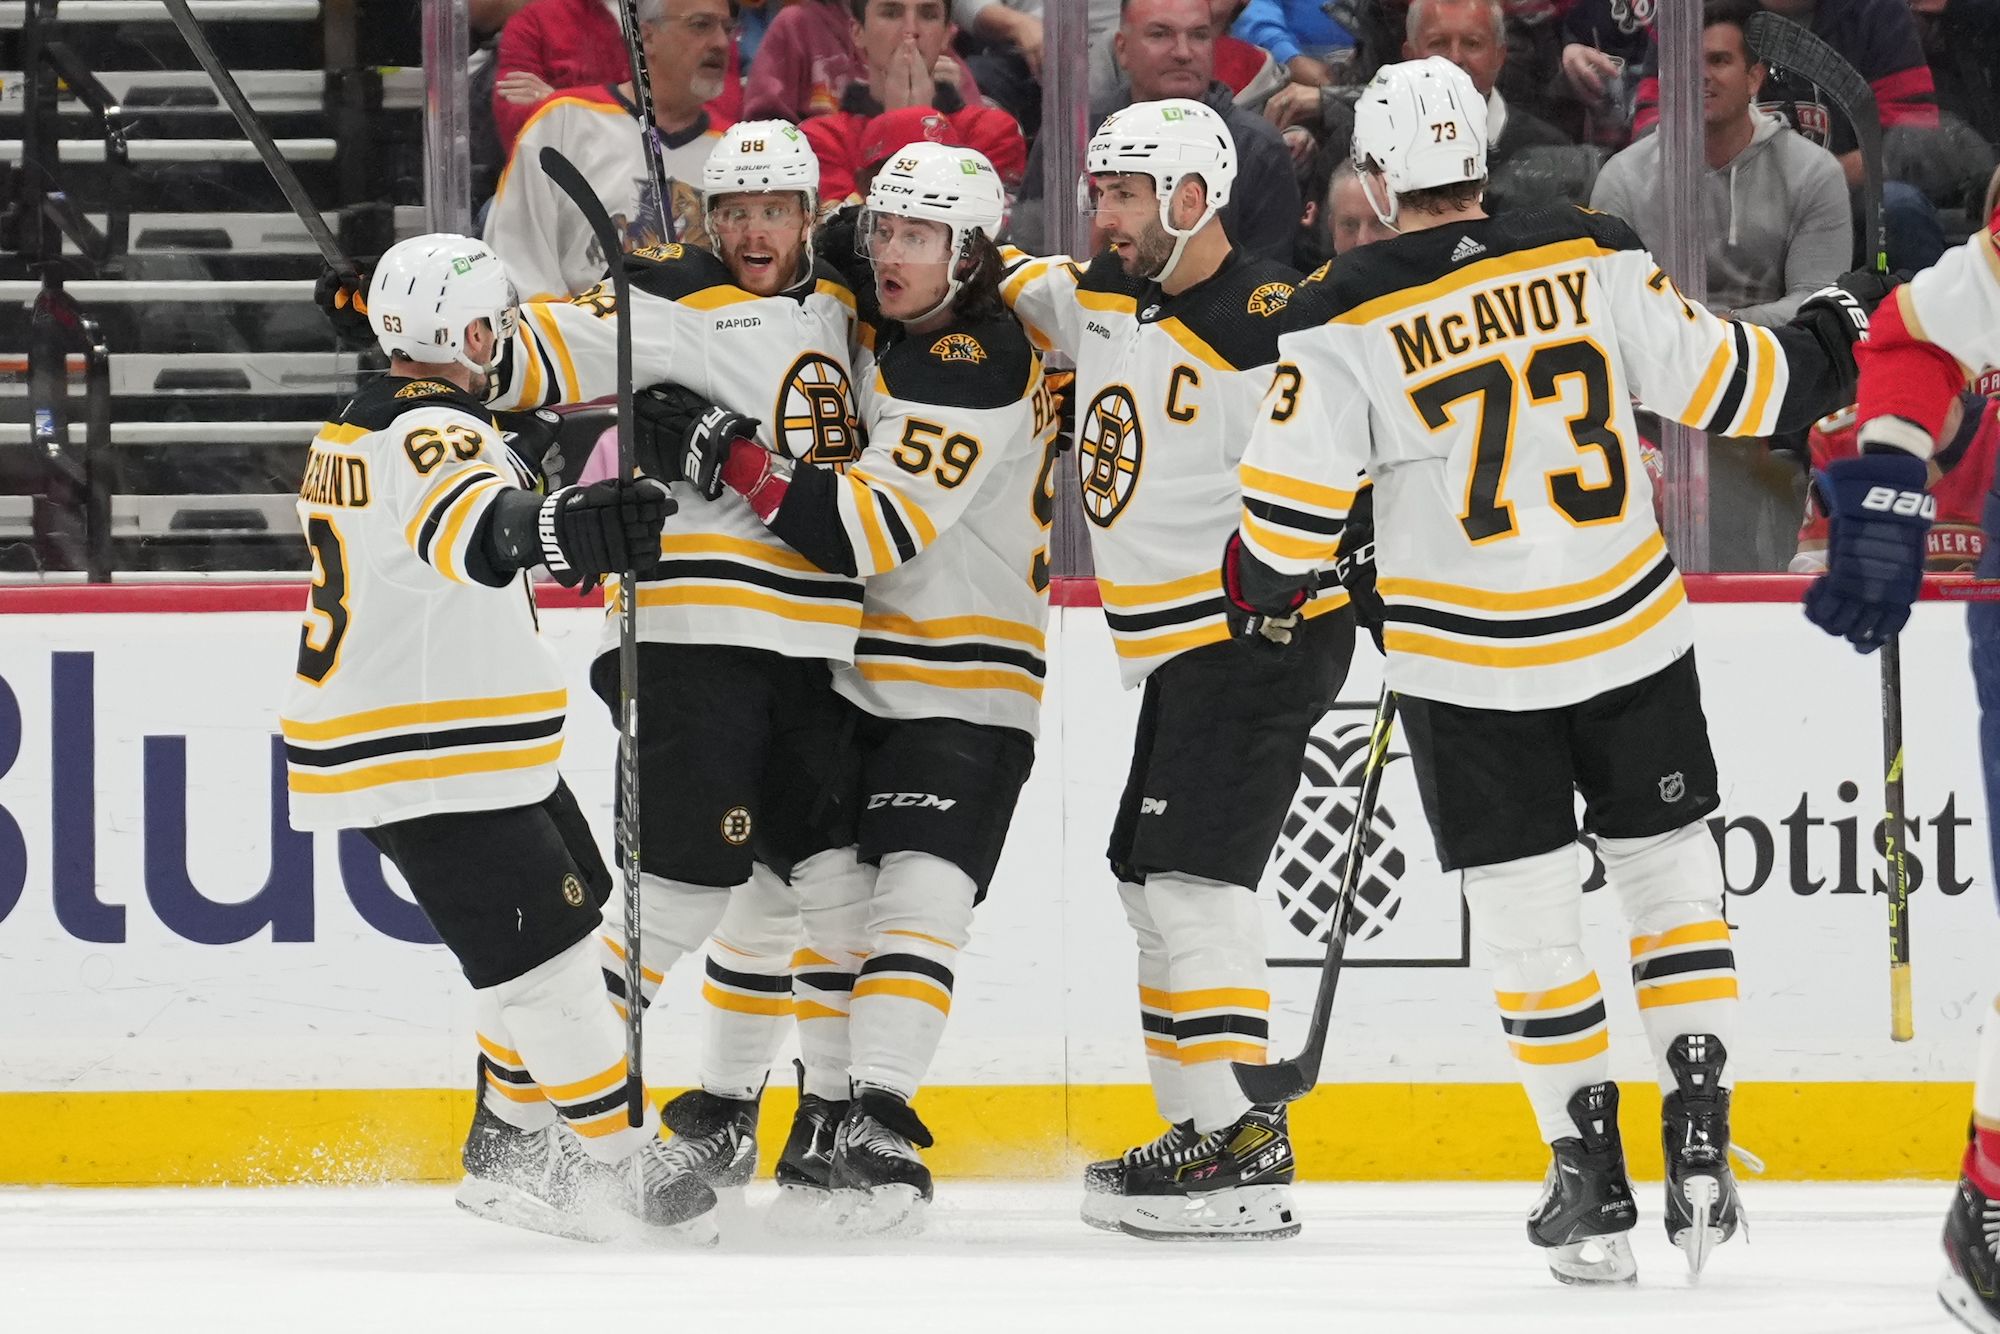 David Pastrnak ready to take on bigger leadership role with Boston